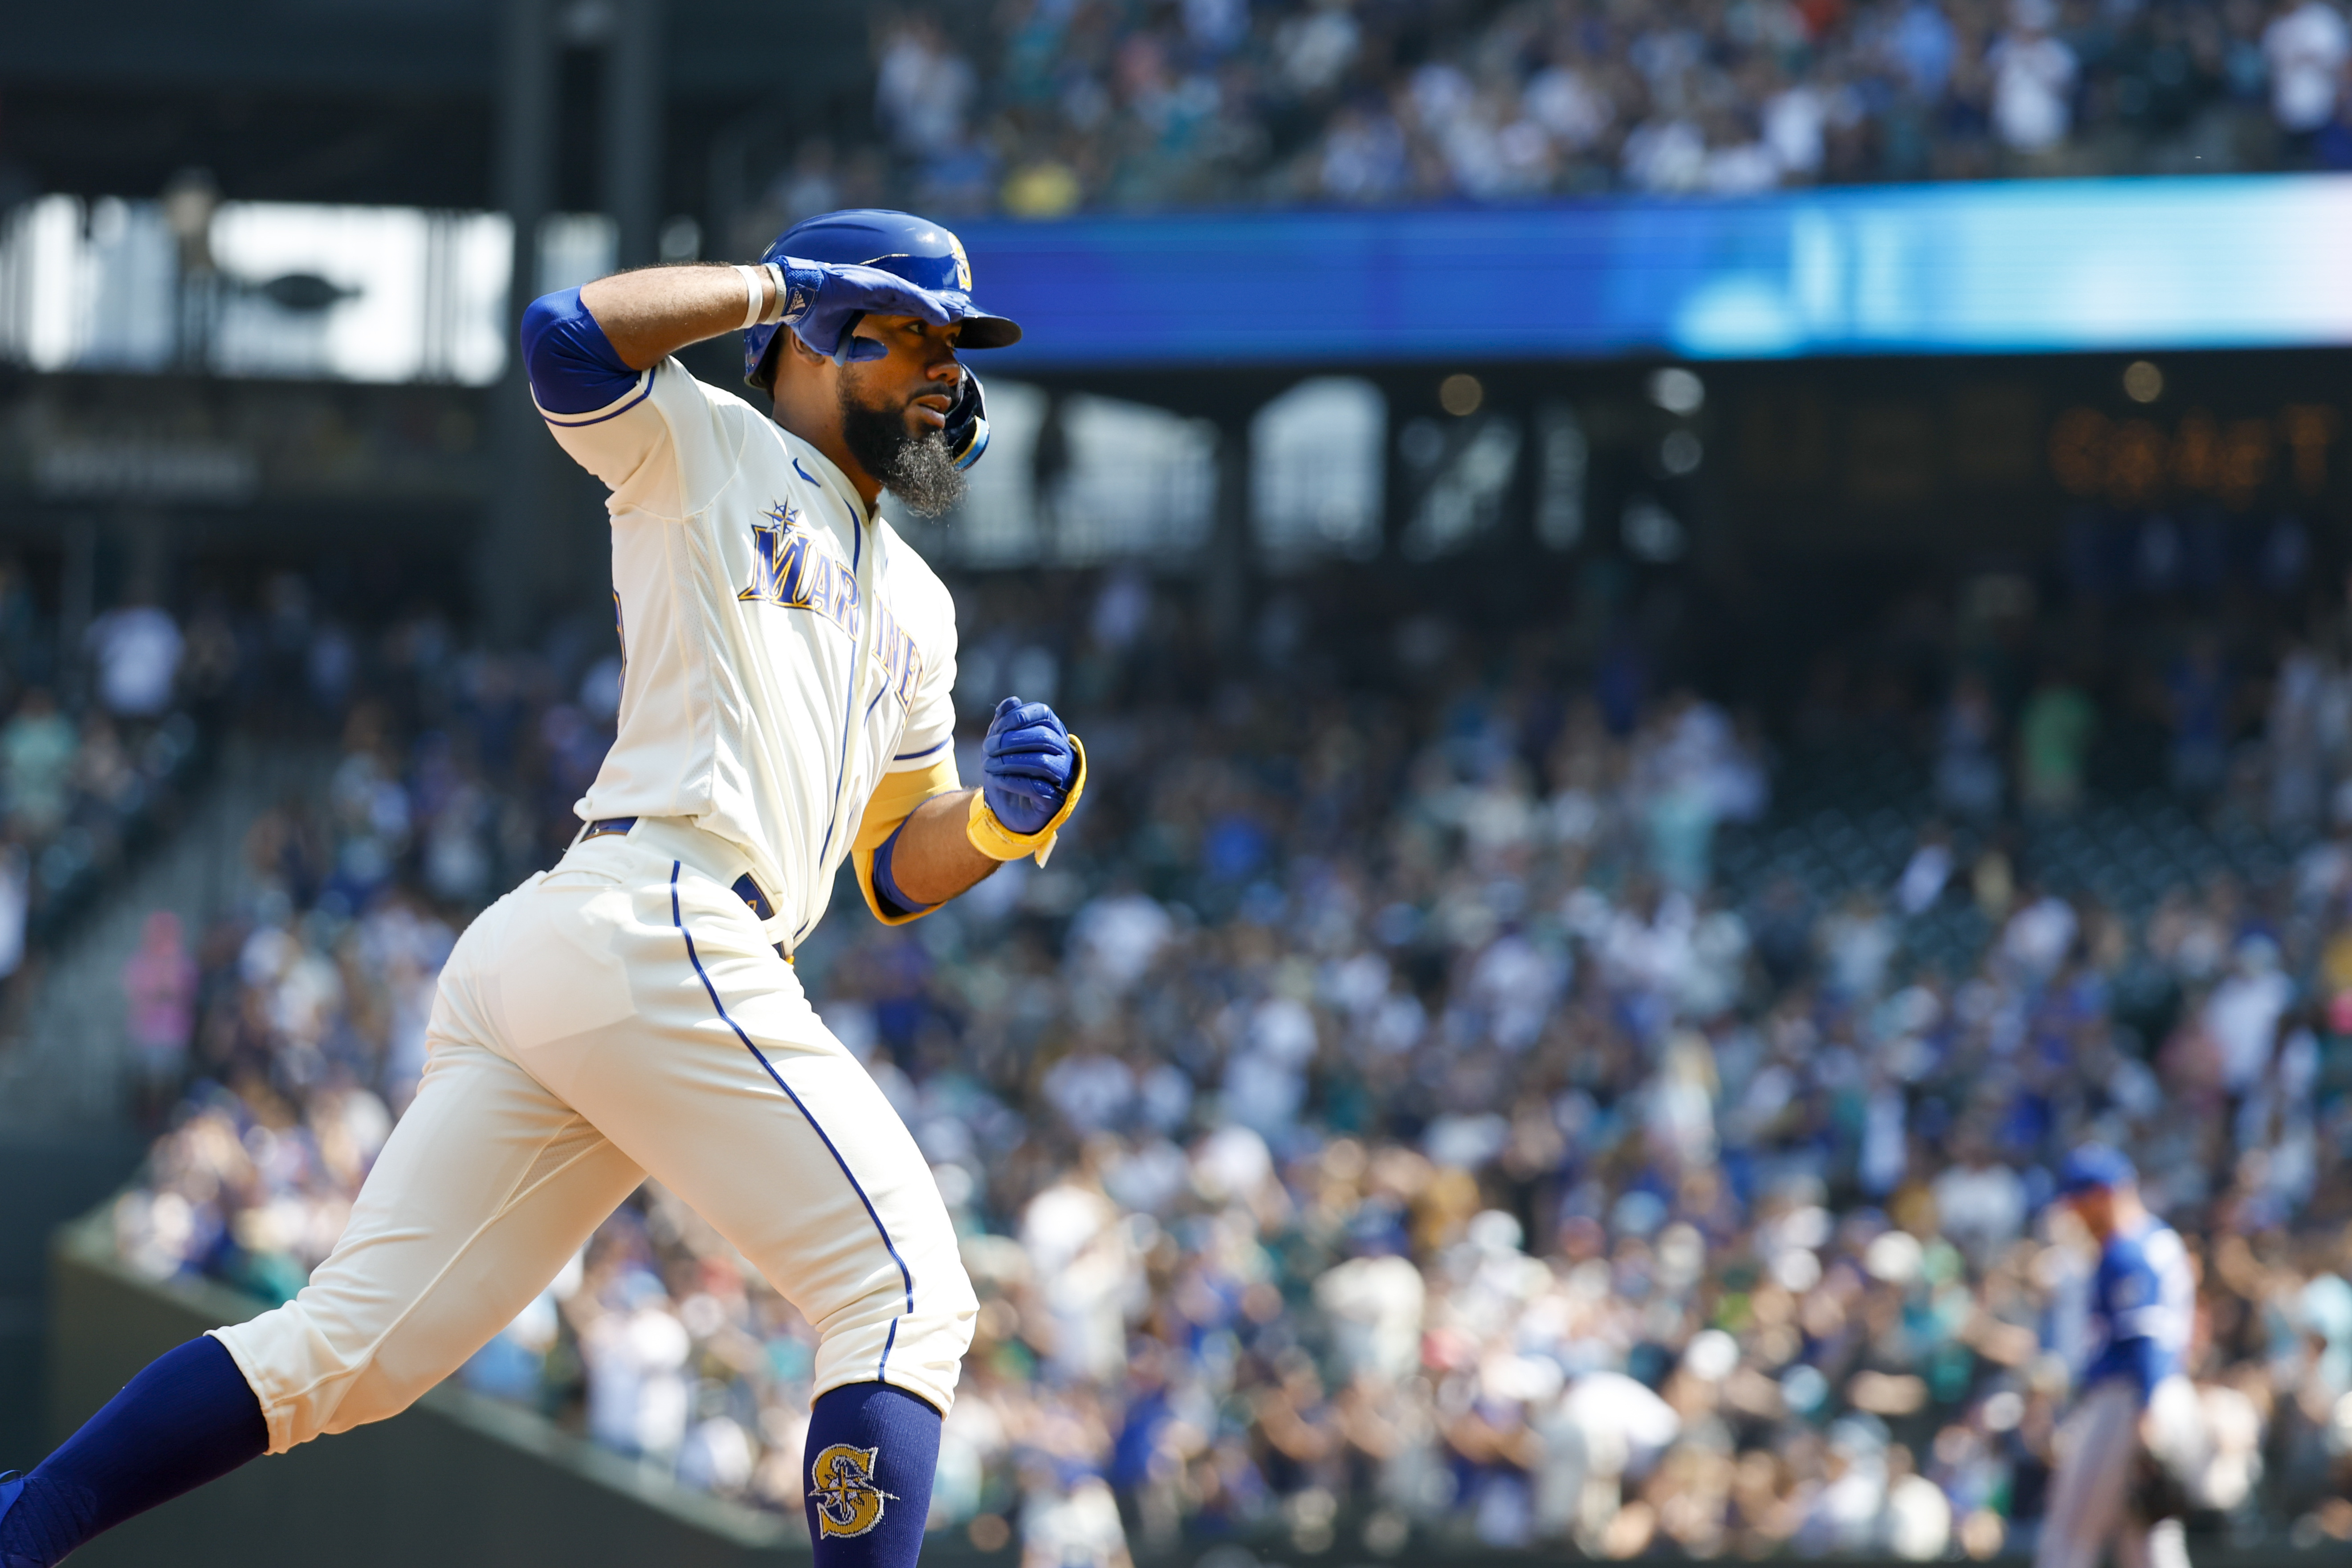 MLB roundup: Mariners blast 7 homers in 15-2 rout of Royals